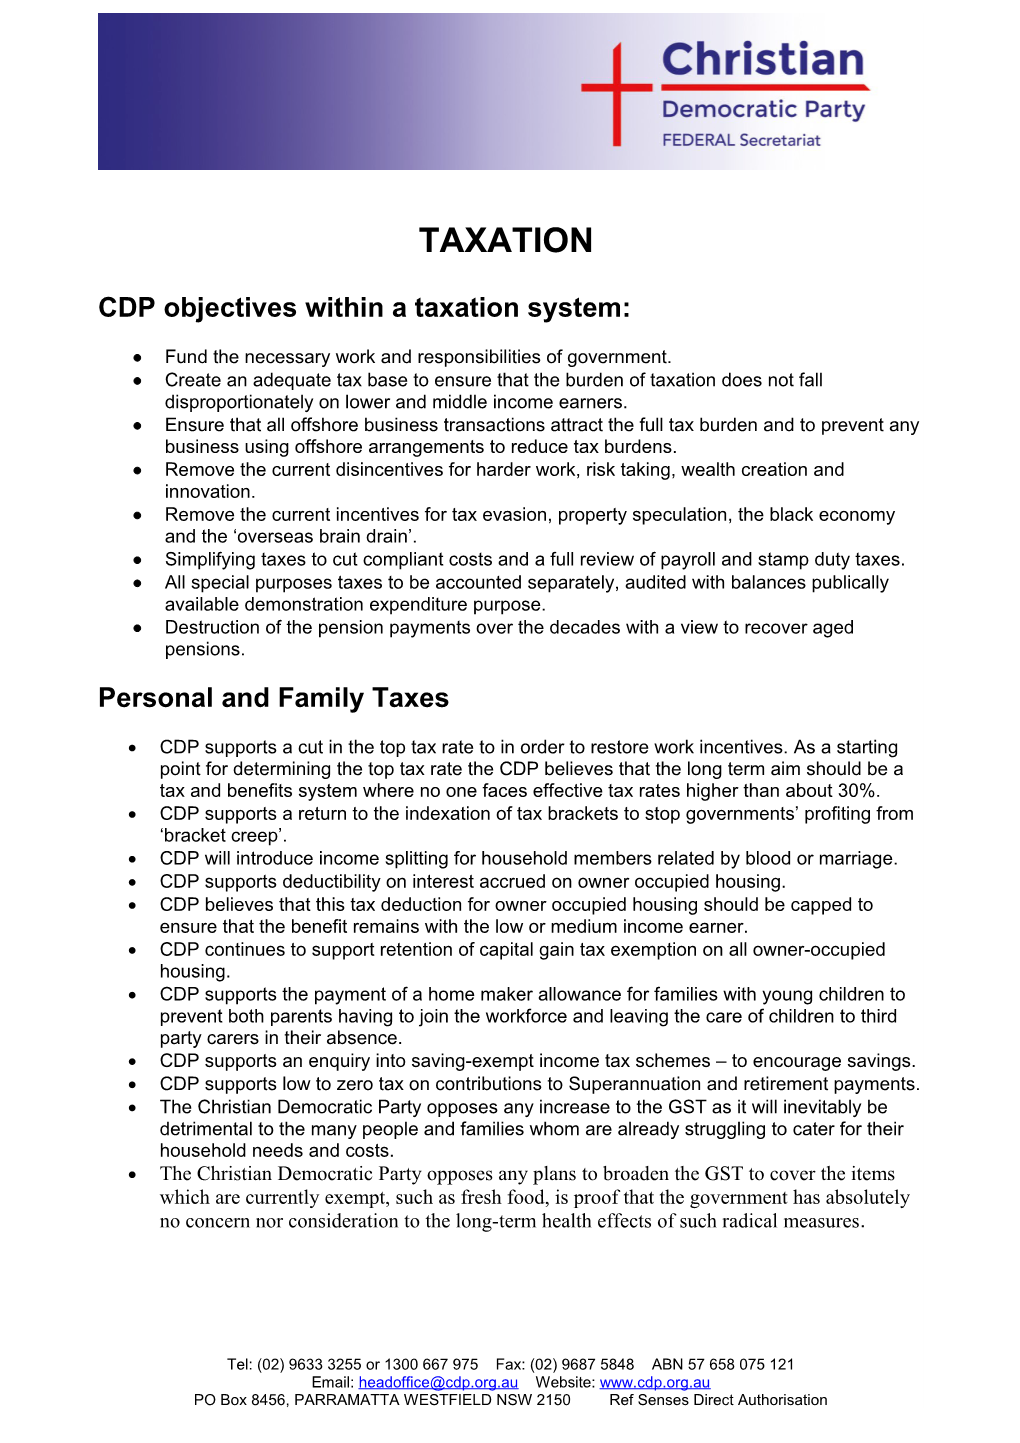 CDP Objectives Within a Taxation System